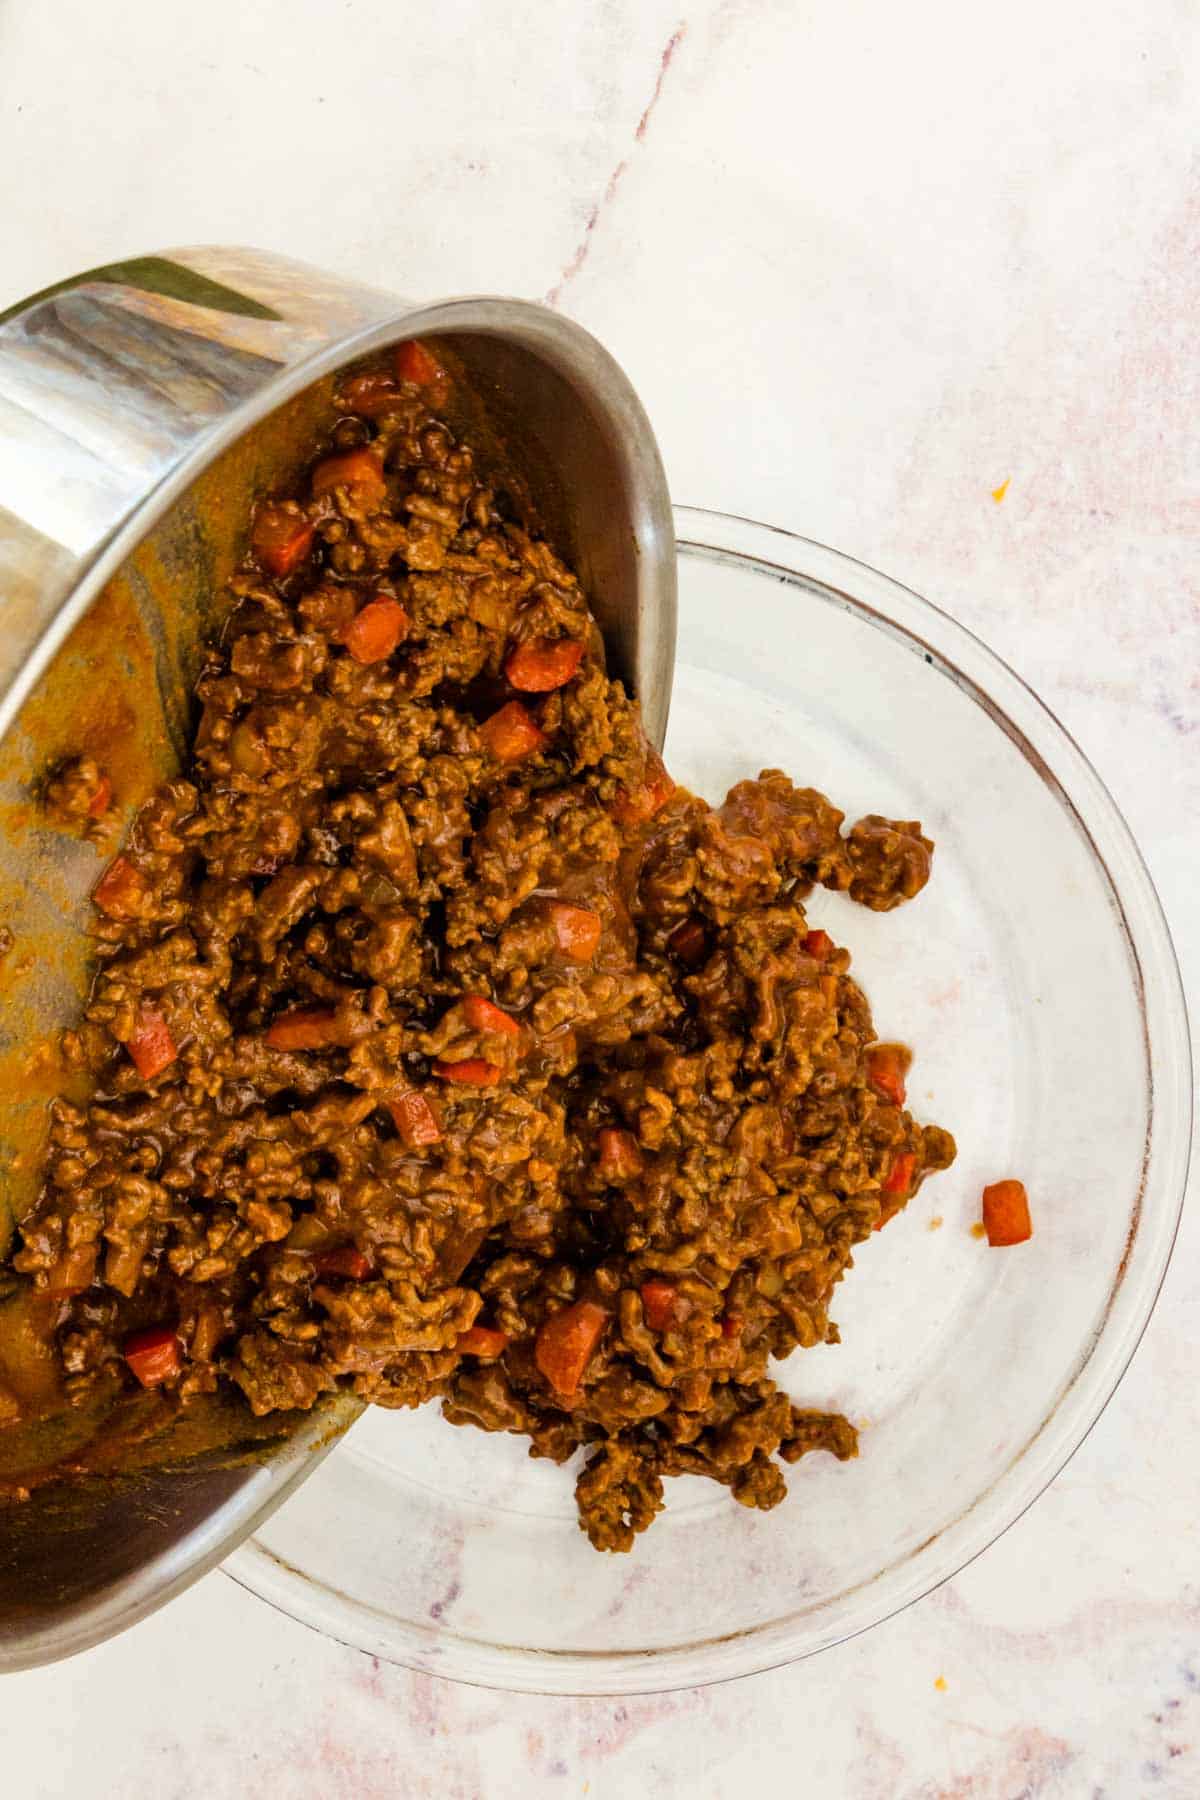 Sloppy joe mixture is poured from a skillet into a glass baking dish.